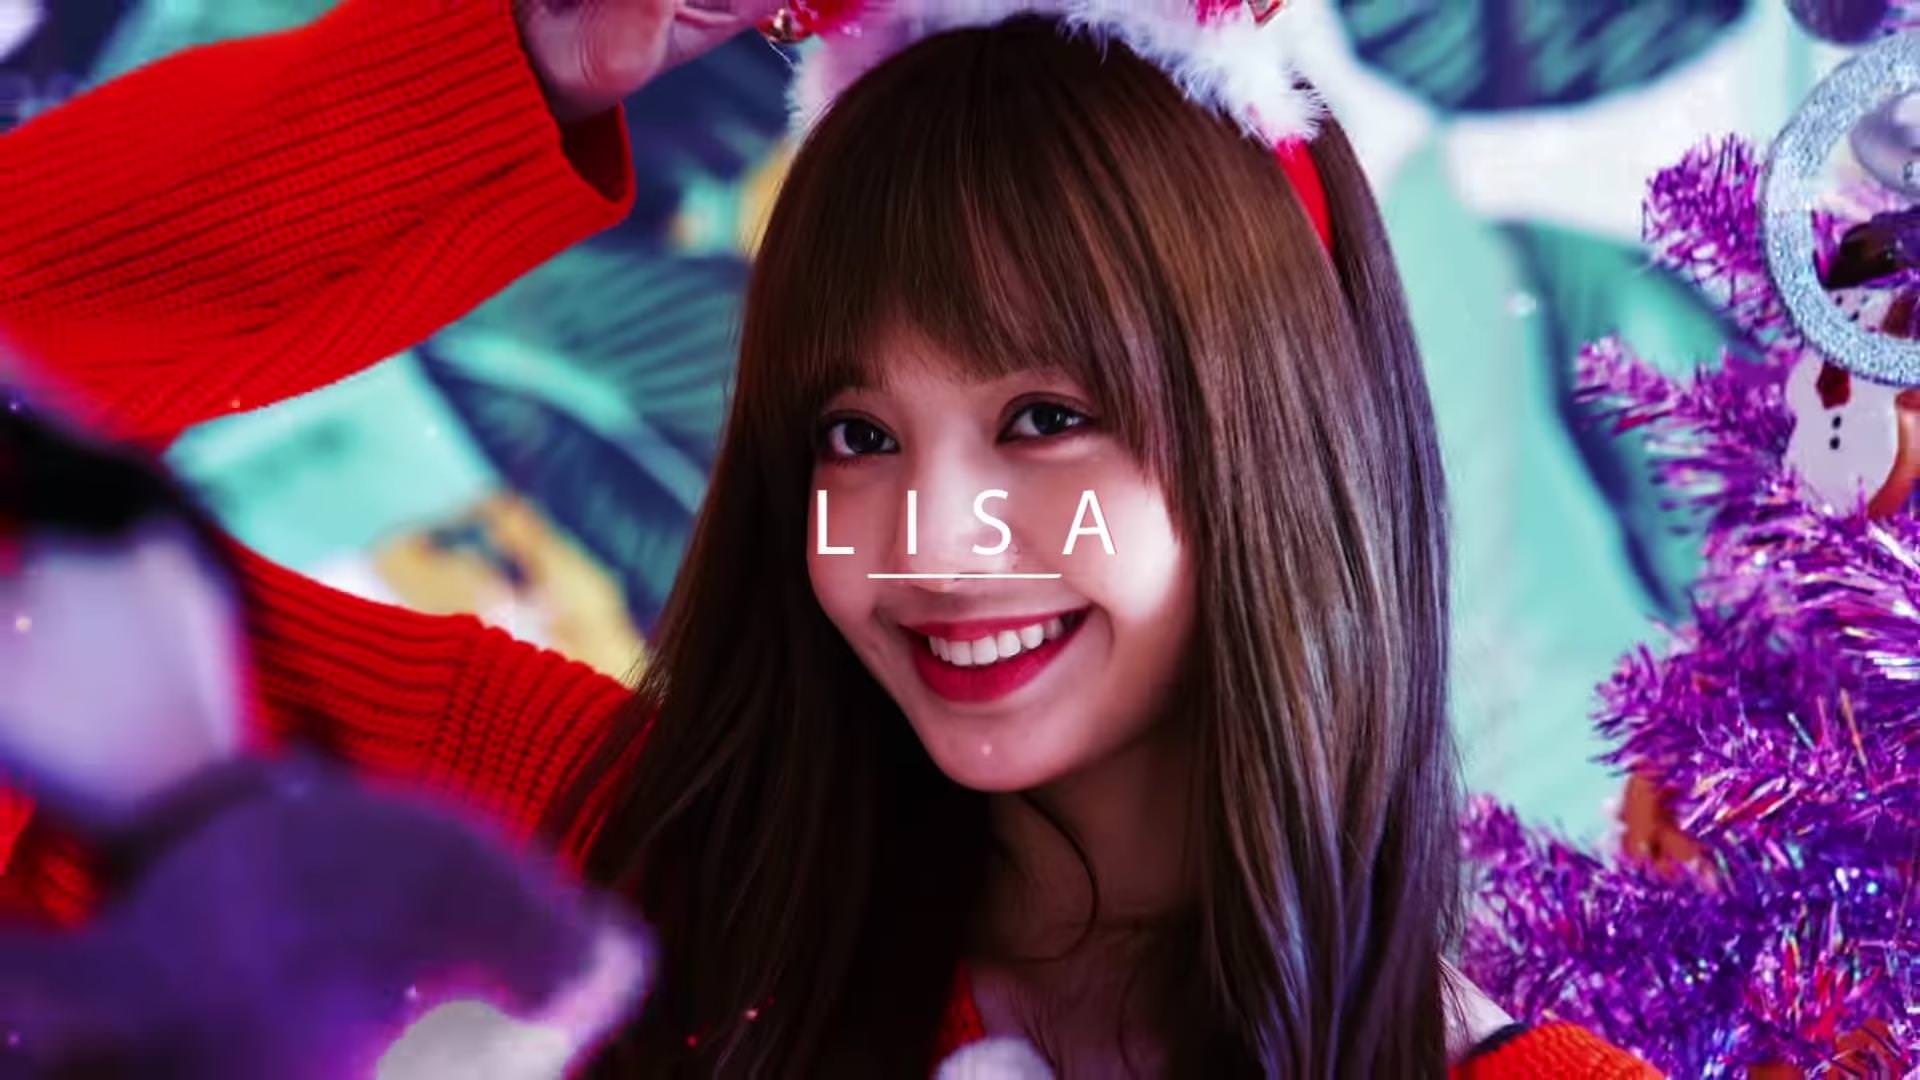 Lisa Blackpink Wallpaper Pc Hd - Image Collections